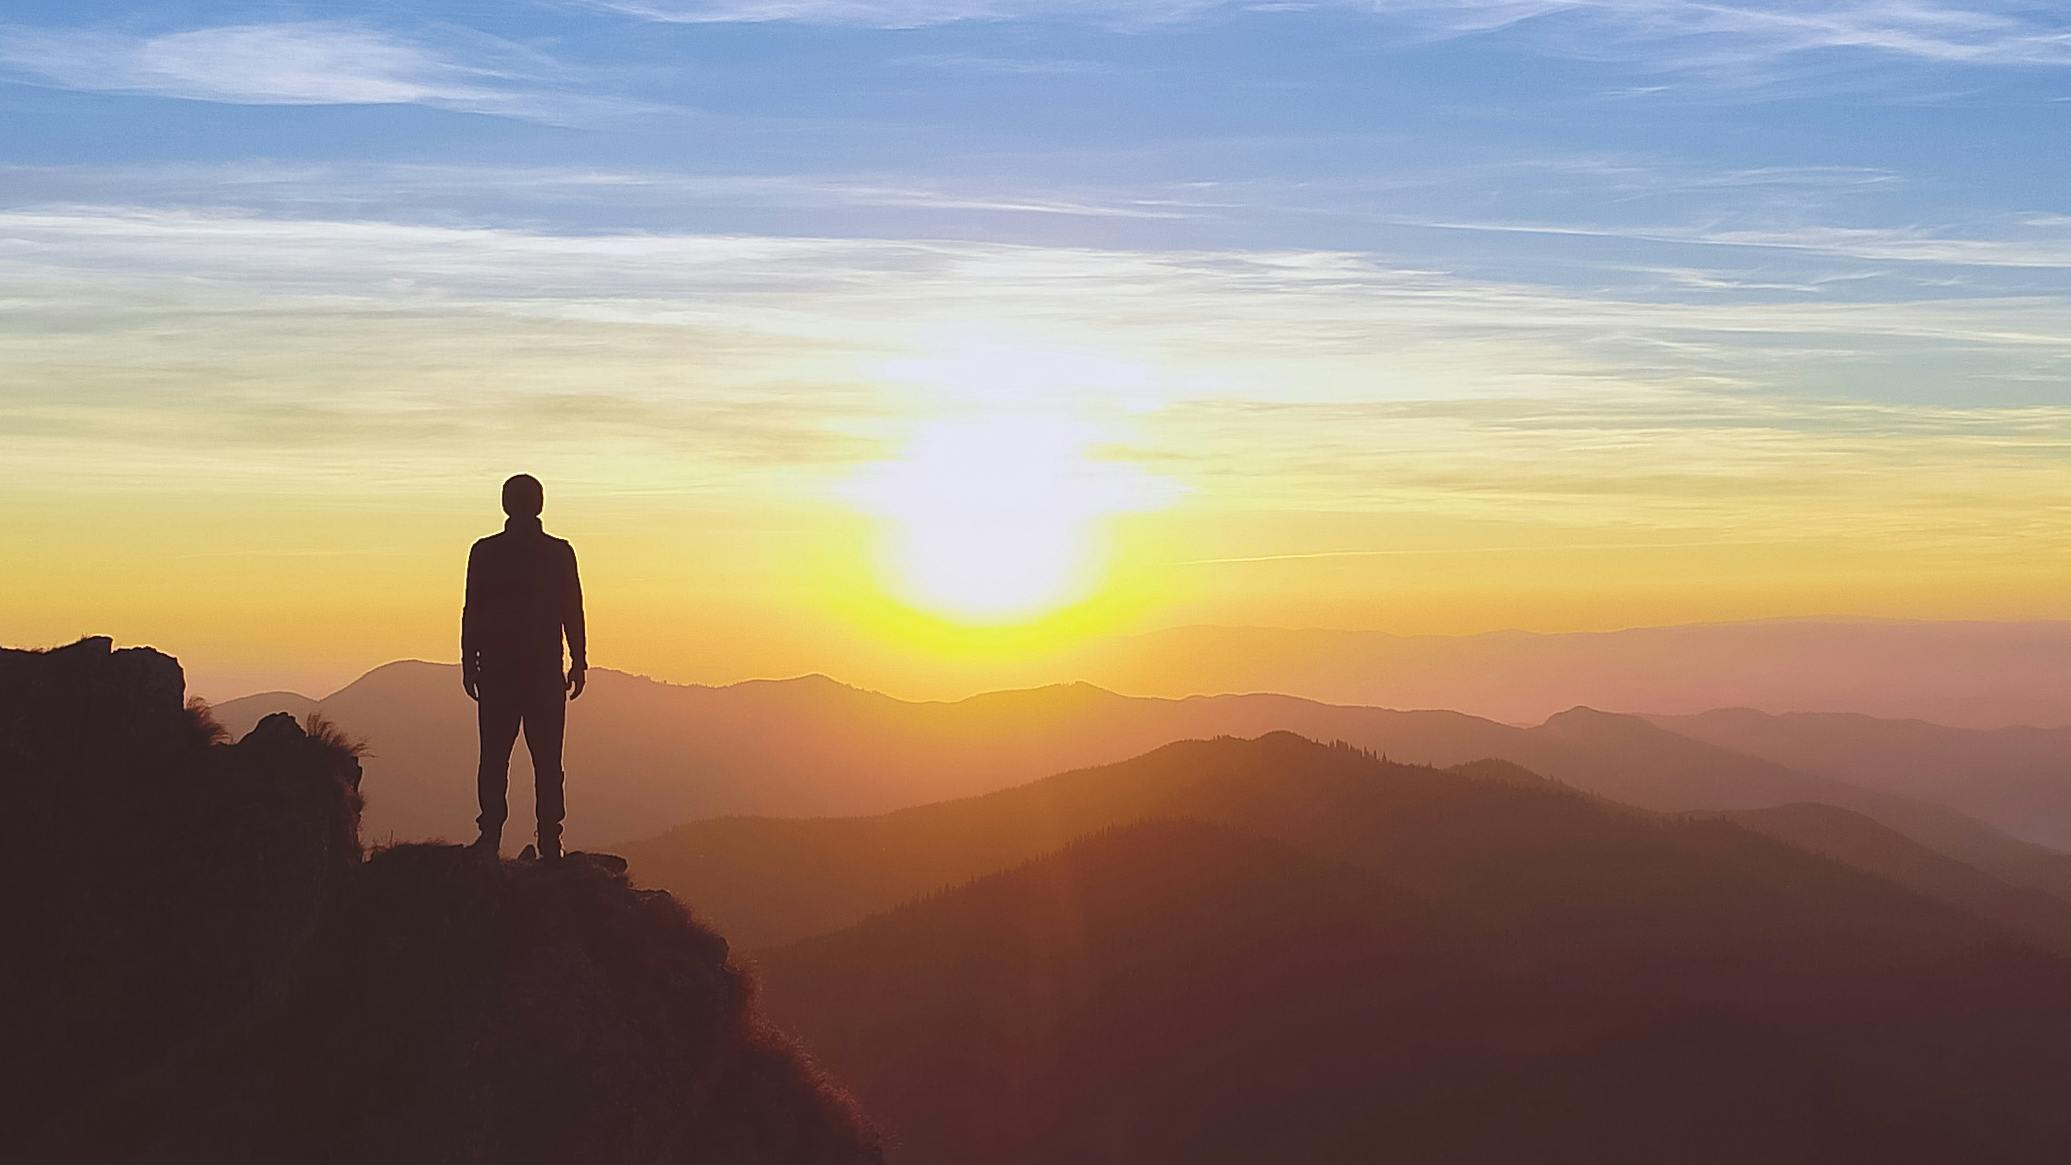 Silhouette of a man standing on a mountain with the sun rising in the background